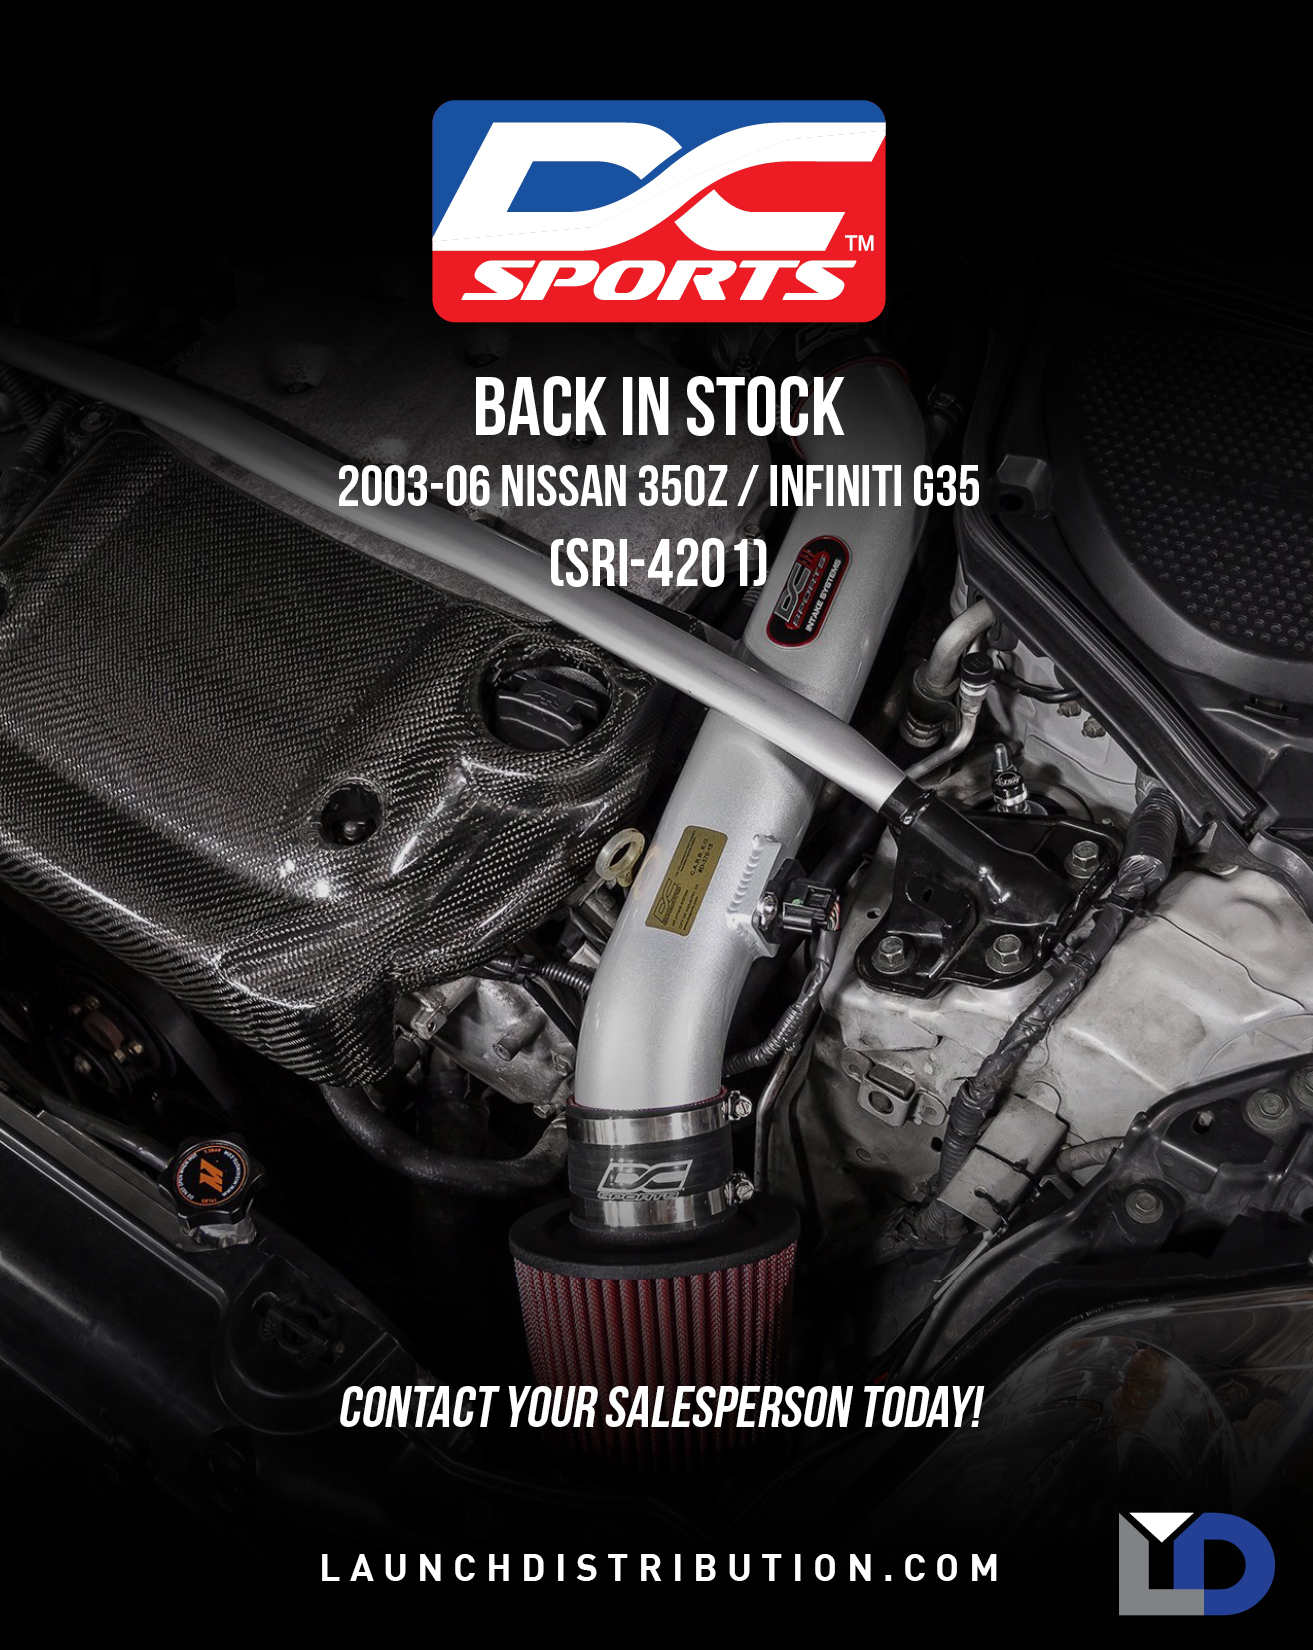 BACK IN STOCK – DC Short RAM Intake for 2003-2206 Nissan 350z and Infiniti G35